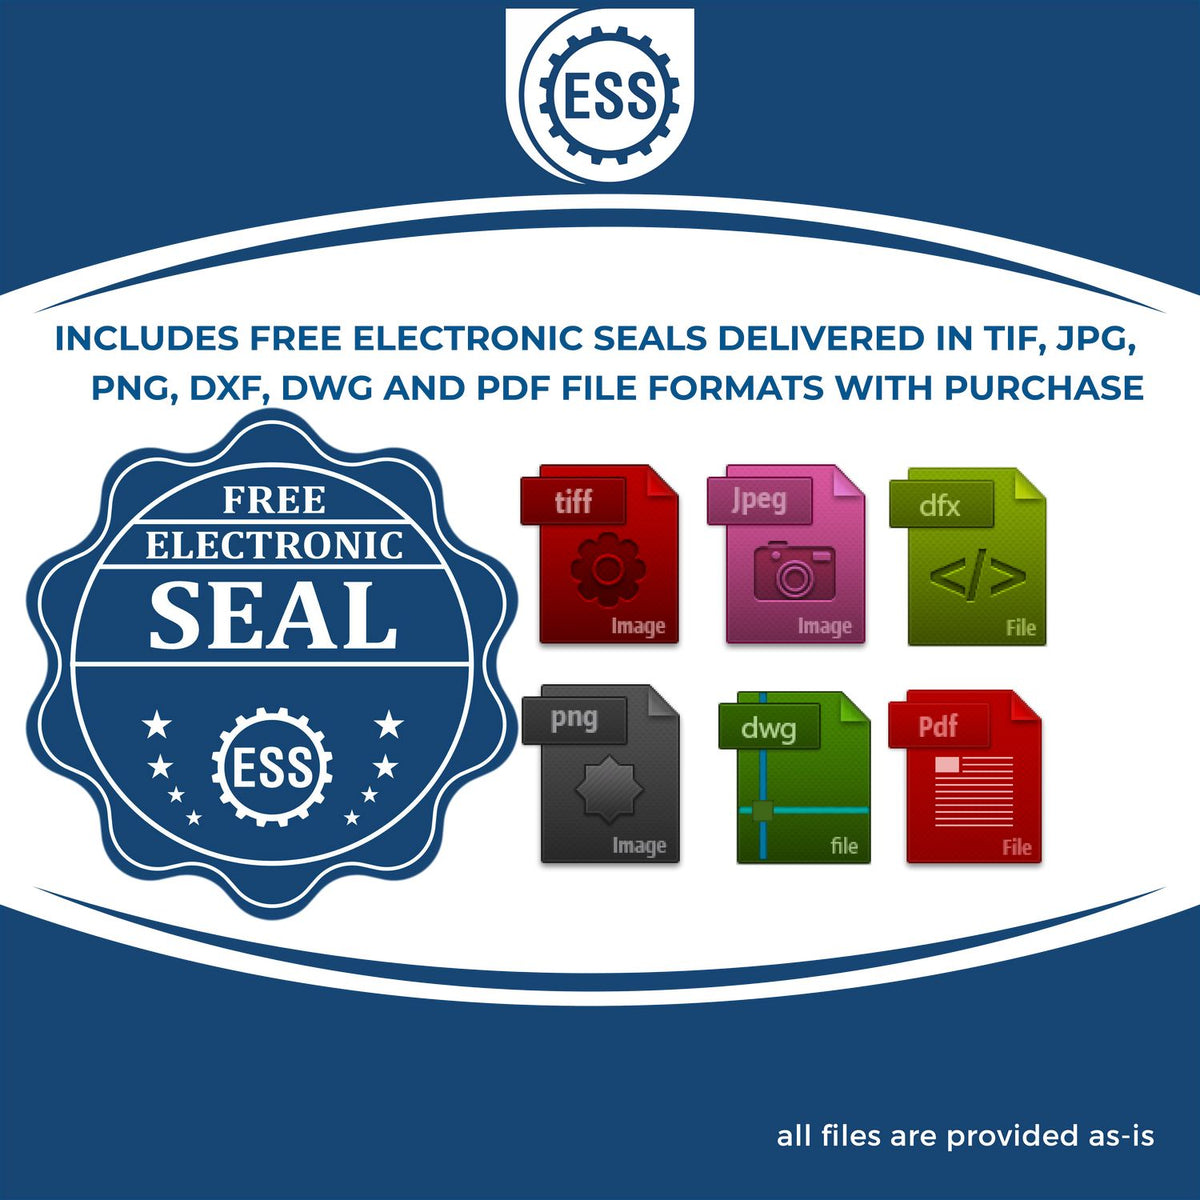 An infographic for the free electronic seal for the Self-Inking Maine Geologist Stamp illustrating the different file type icons such as DXF, DWG, TIF, JPG and PNG.